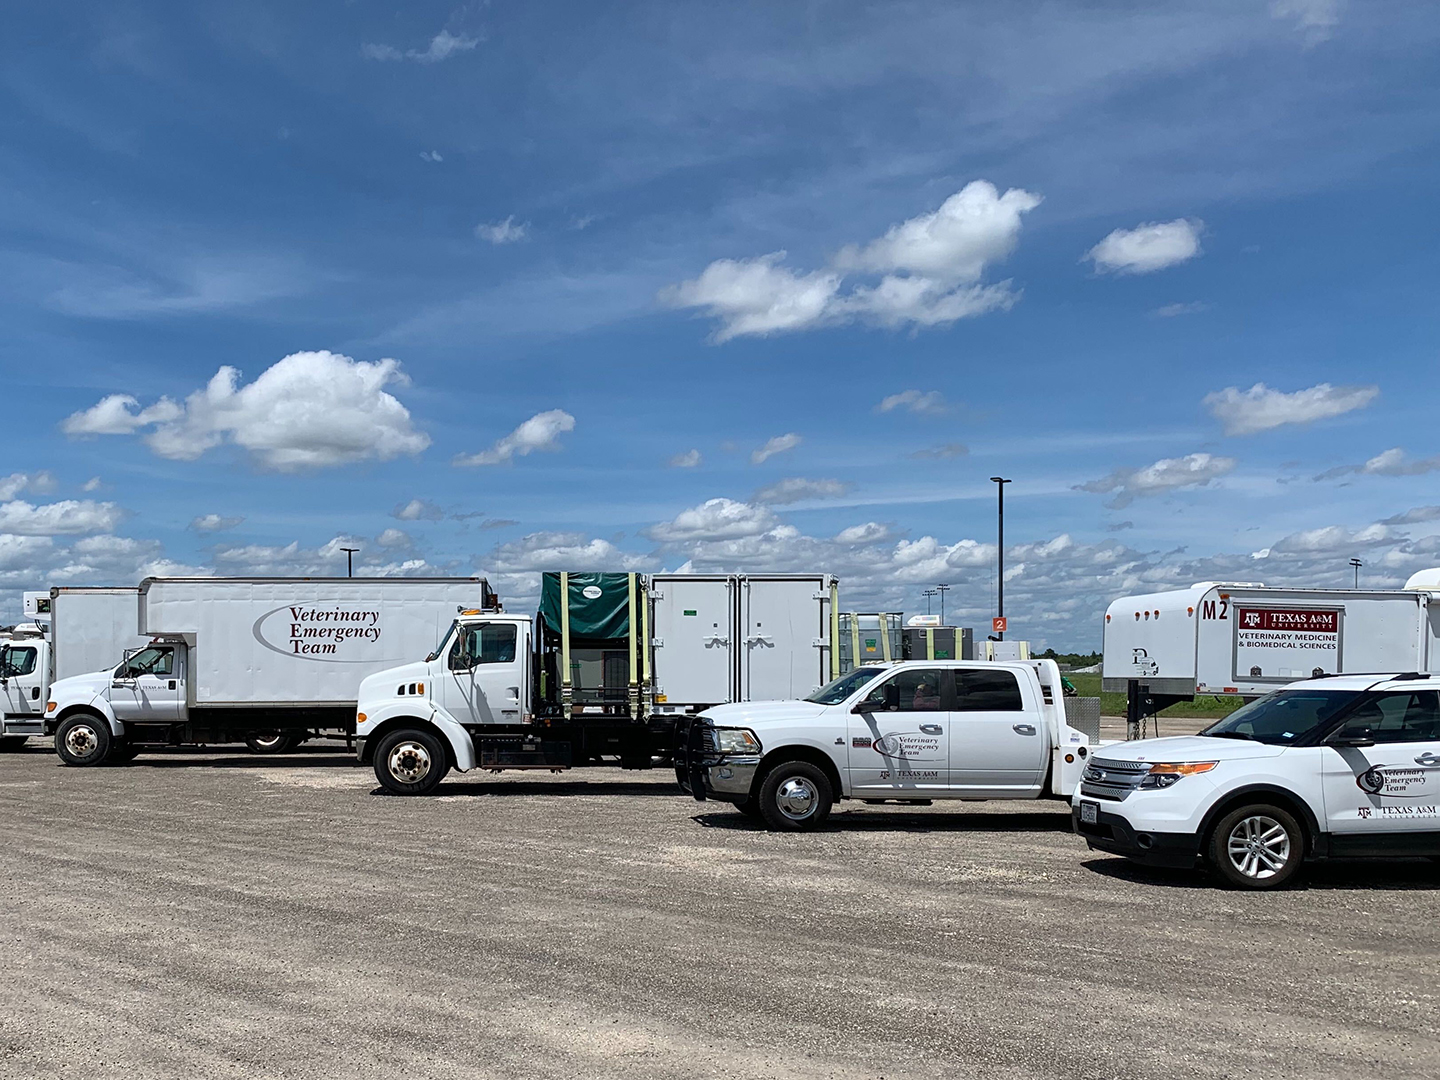 A row of Veterinary Emergency Team trucks lined up under a clear blue sky